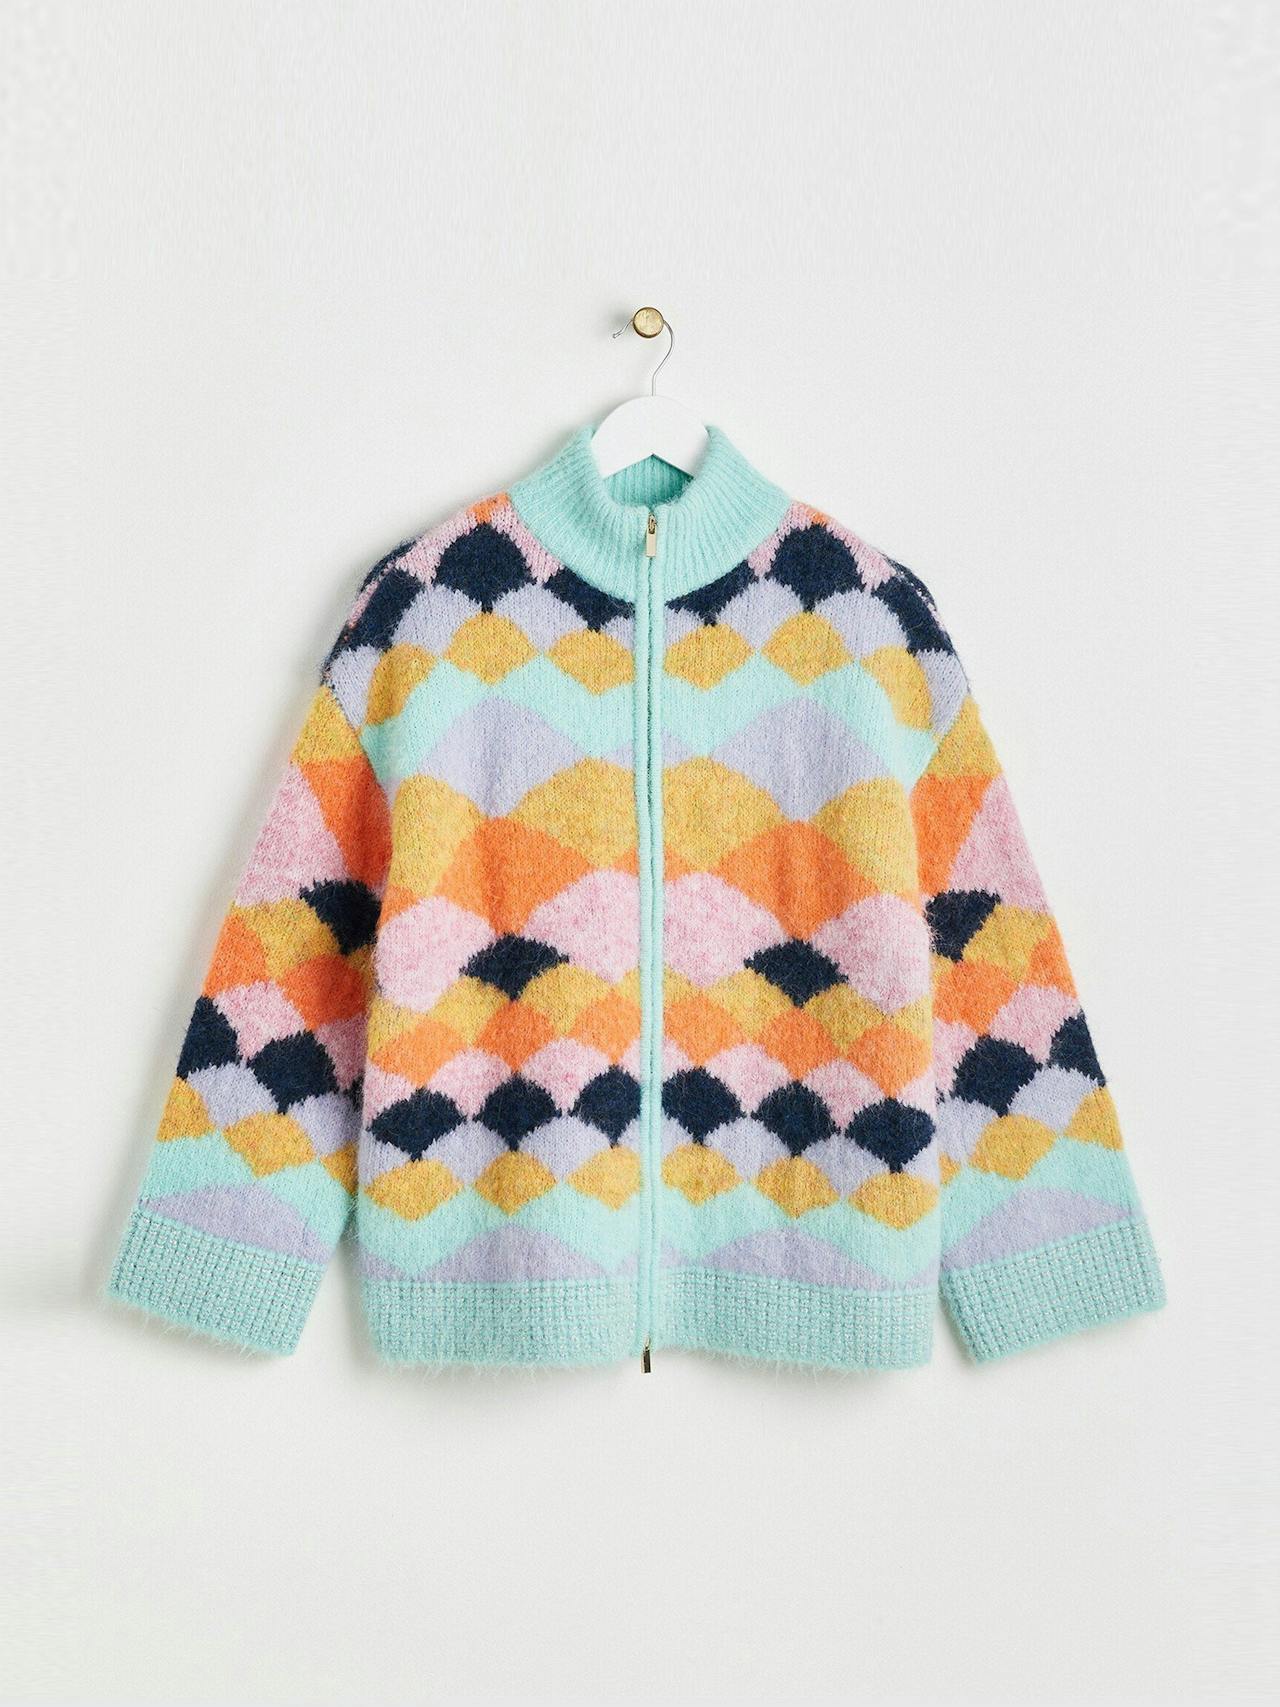 Scalloped pattern knitted zip up cardigan